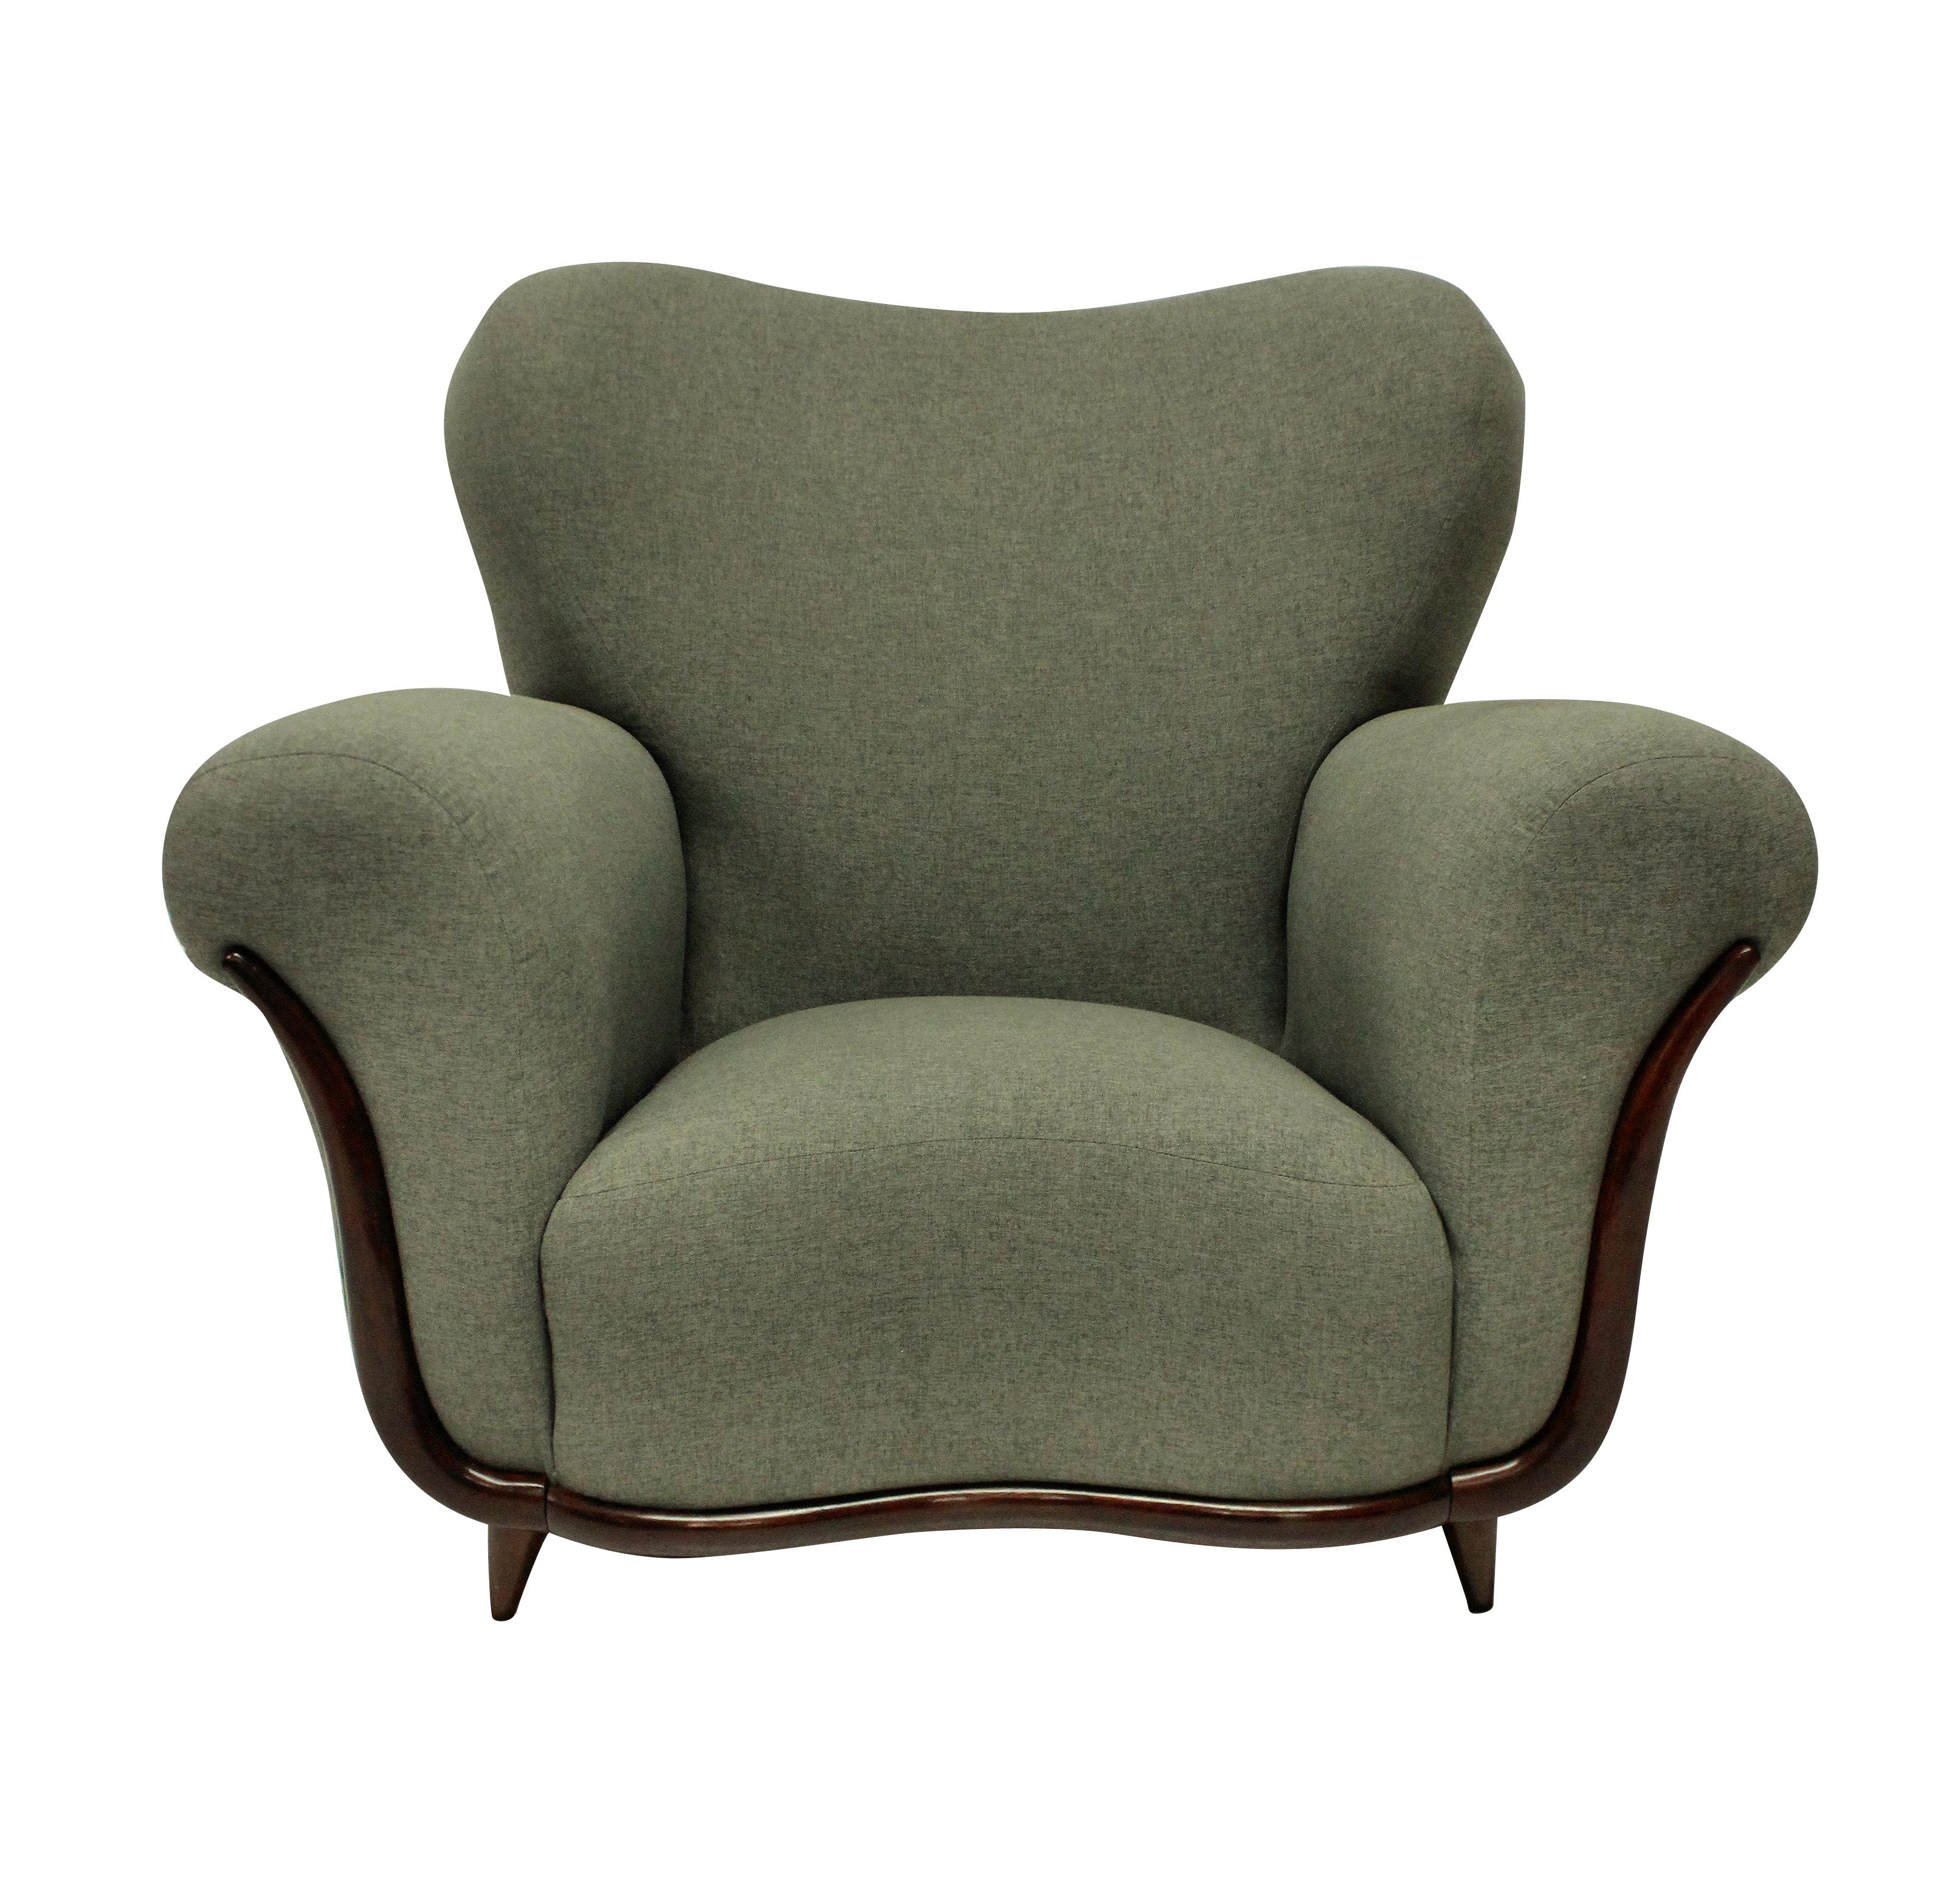 A pair of large Italian sculptural armchairs by Ulrich which is very comfortable. Newly upholstered in grey fabric and in a Minimalist fashion without piping or buttons, which accentuates the curved shapes. On tapering French polished feet and